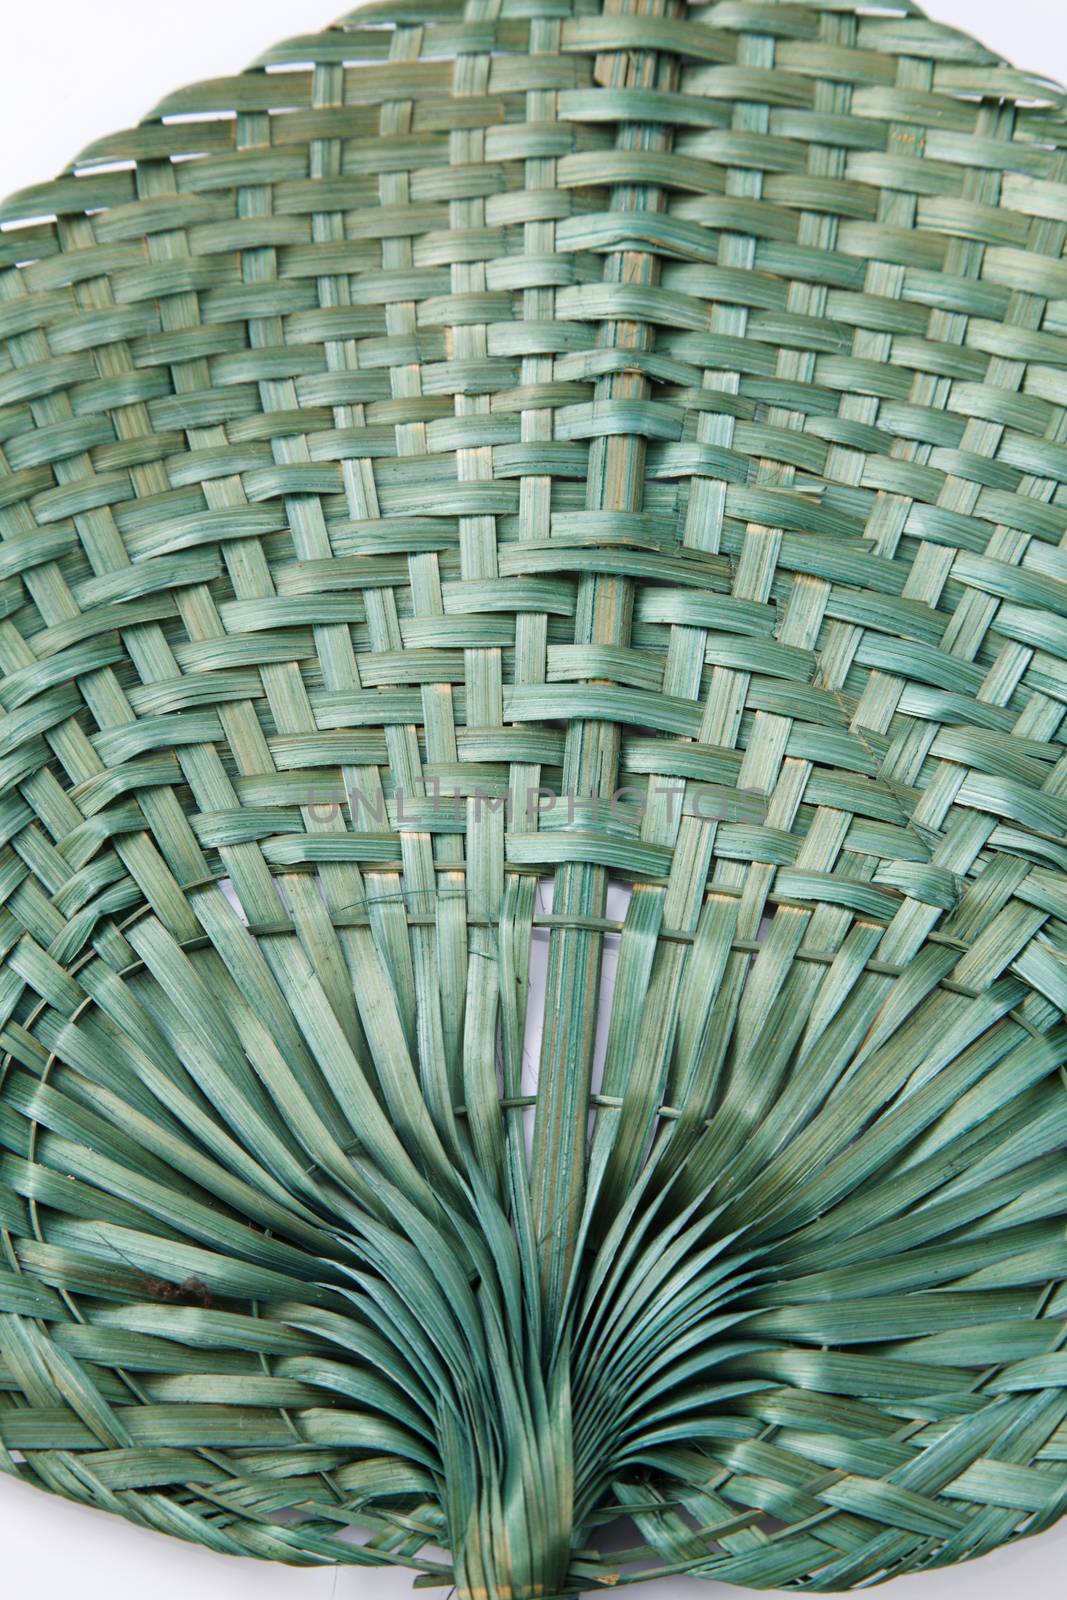 Green color native fan made from palm leaves on white background